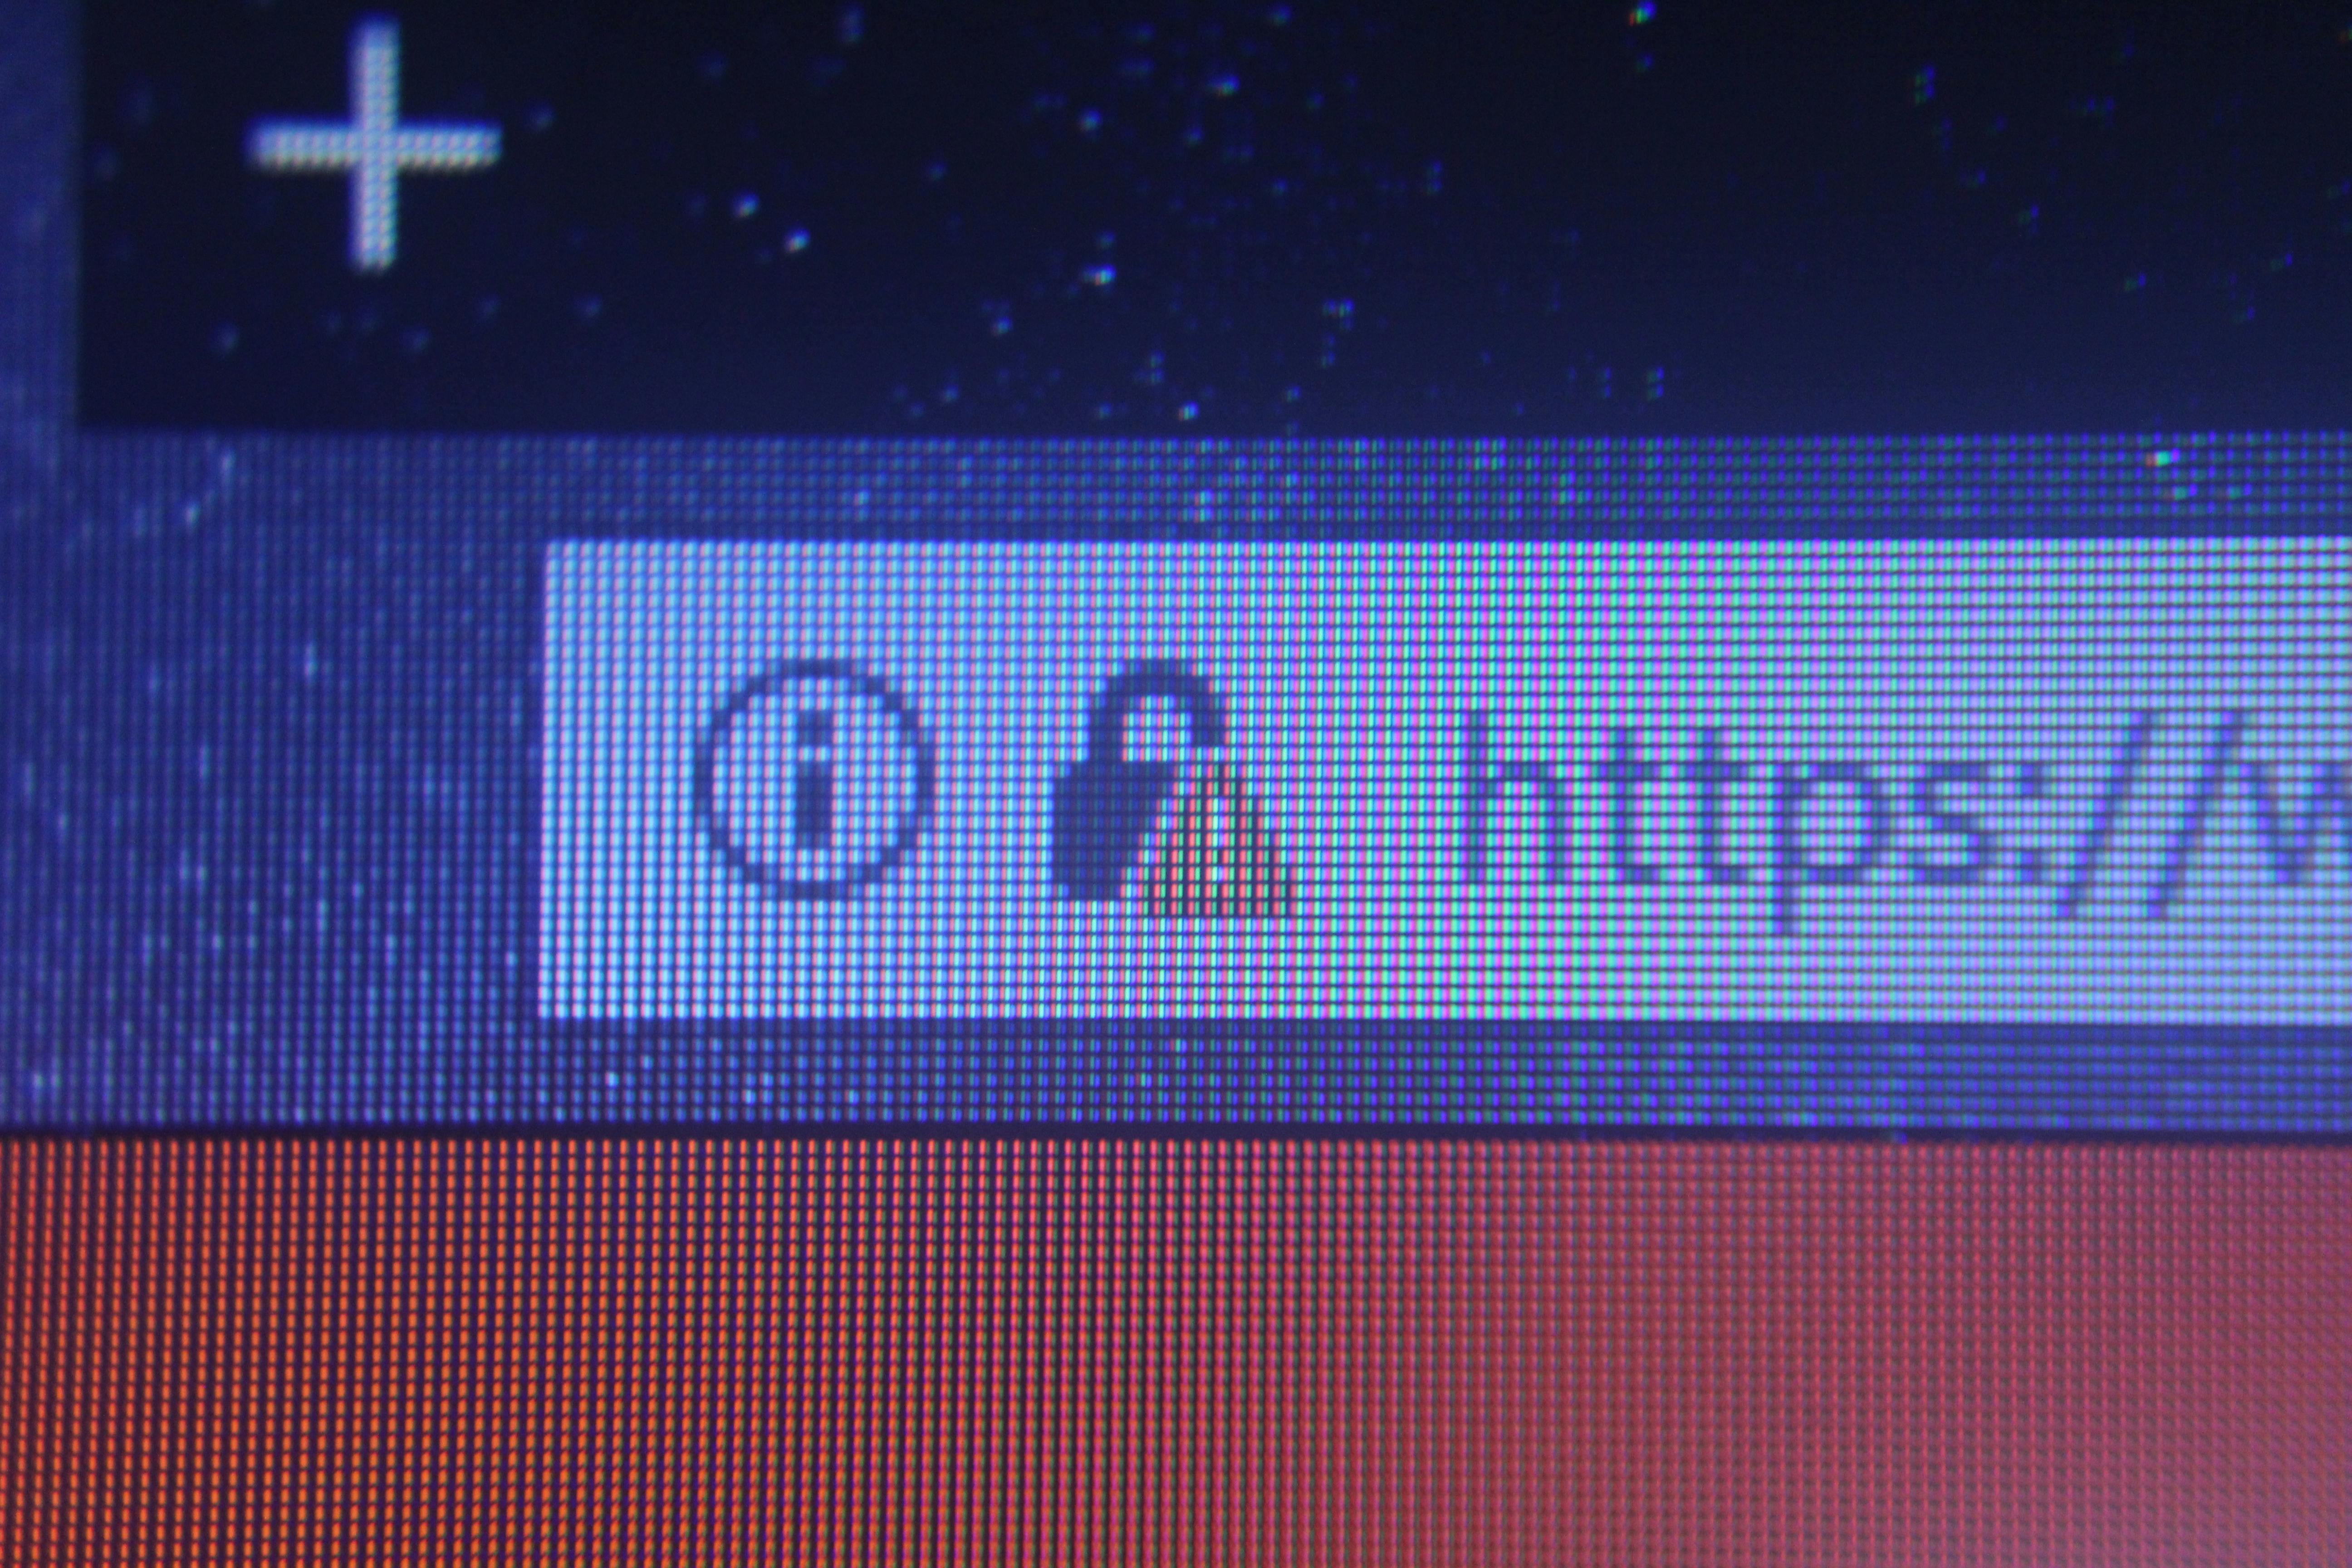 Free stock photo of address bar, https, unsecure